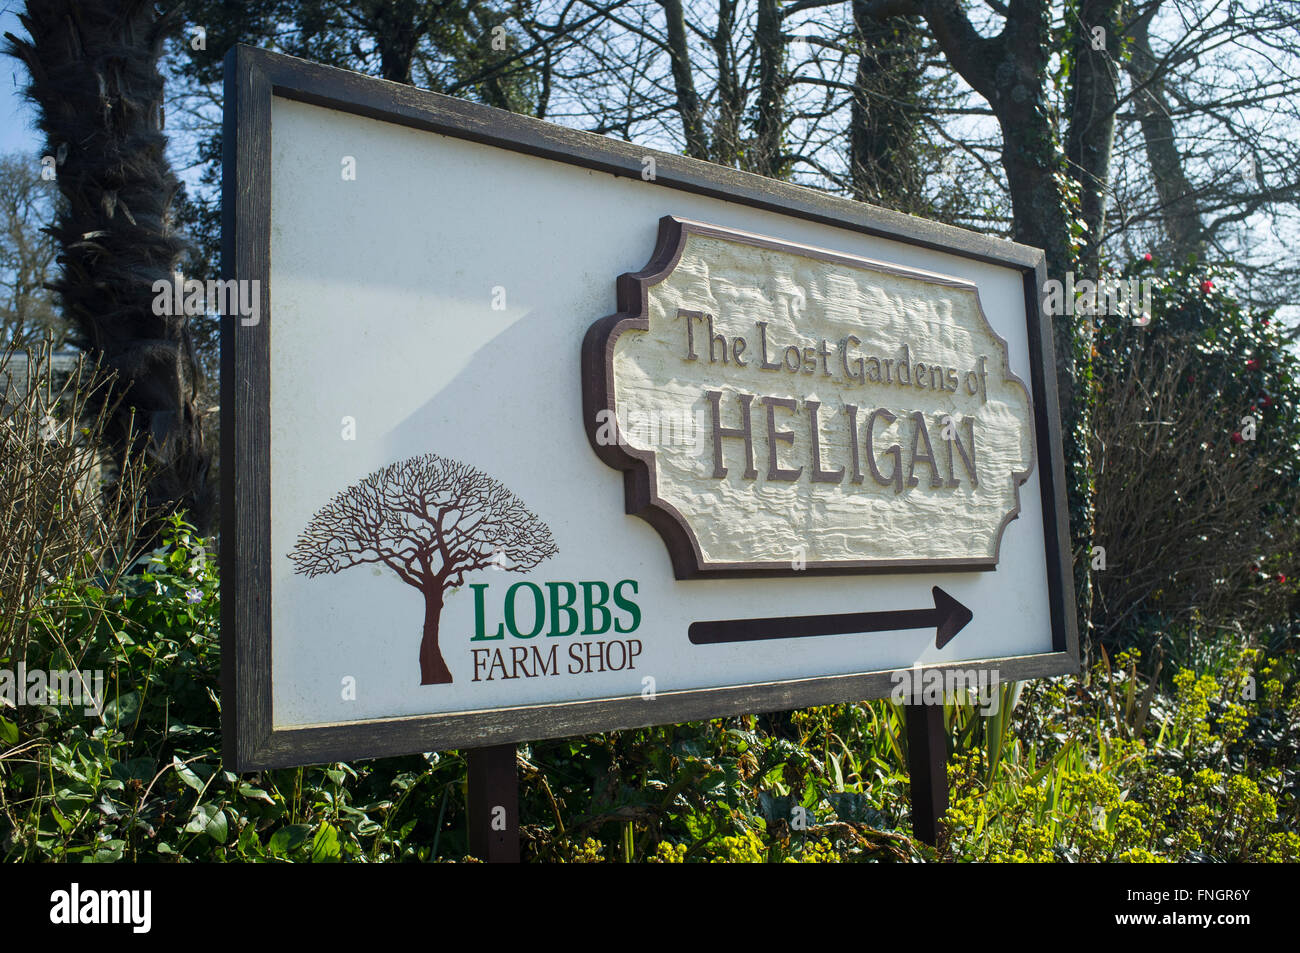 The Lost Gardens of Heligan. Stock Photo